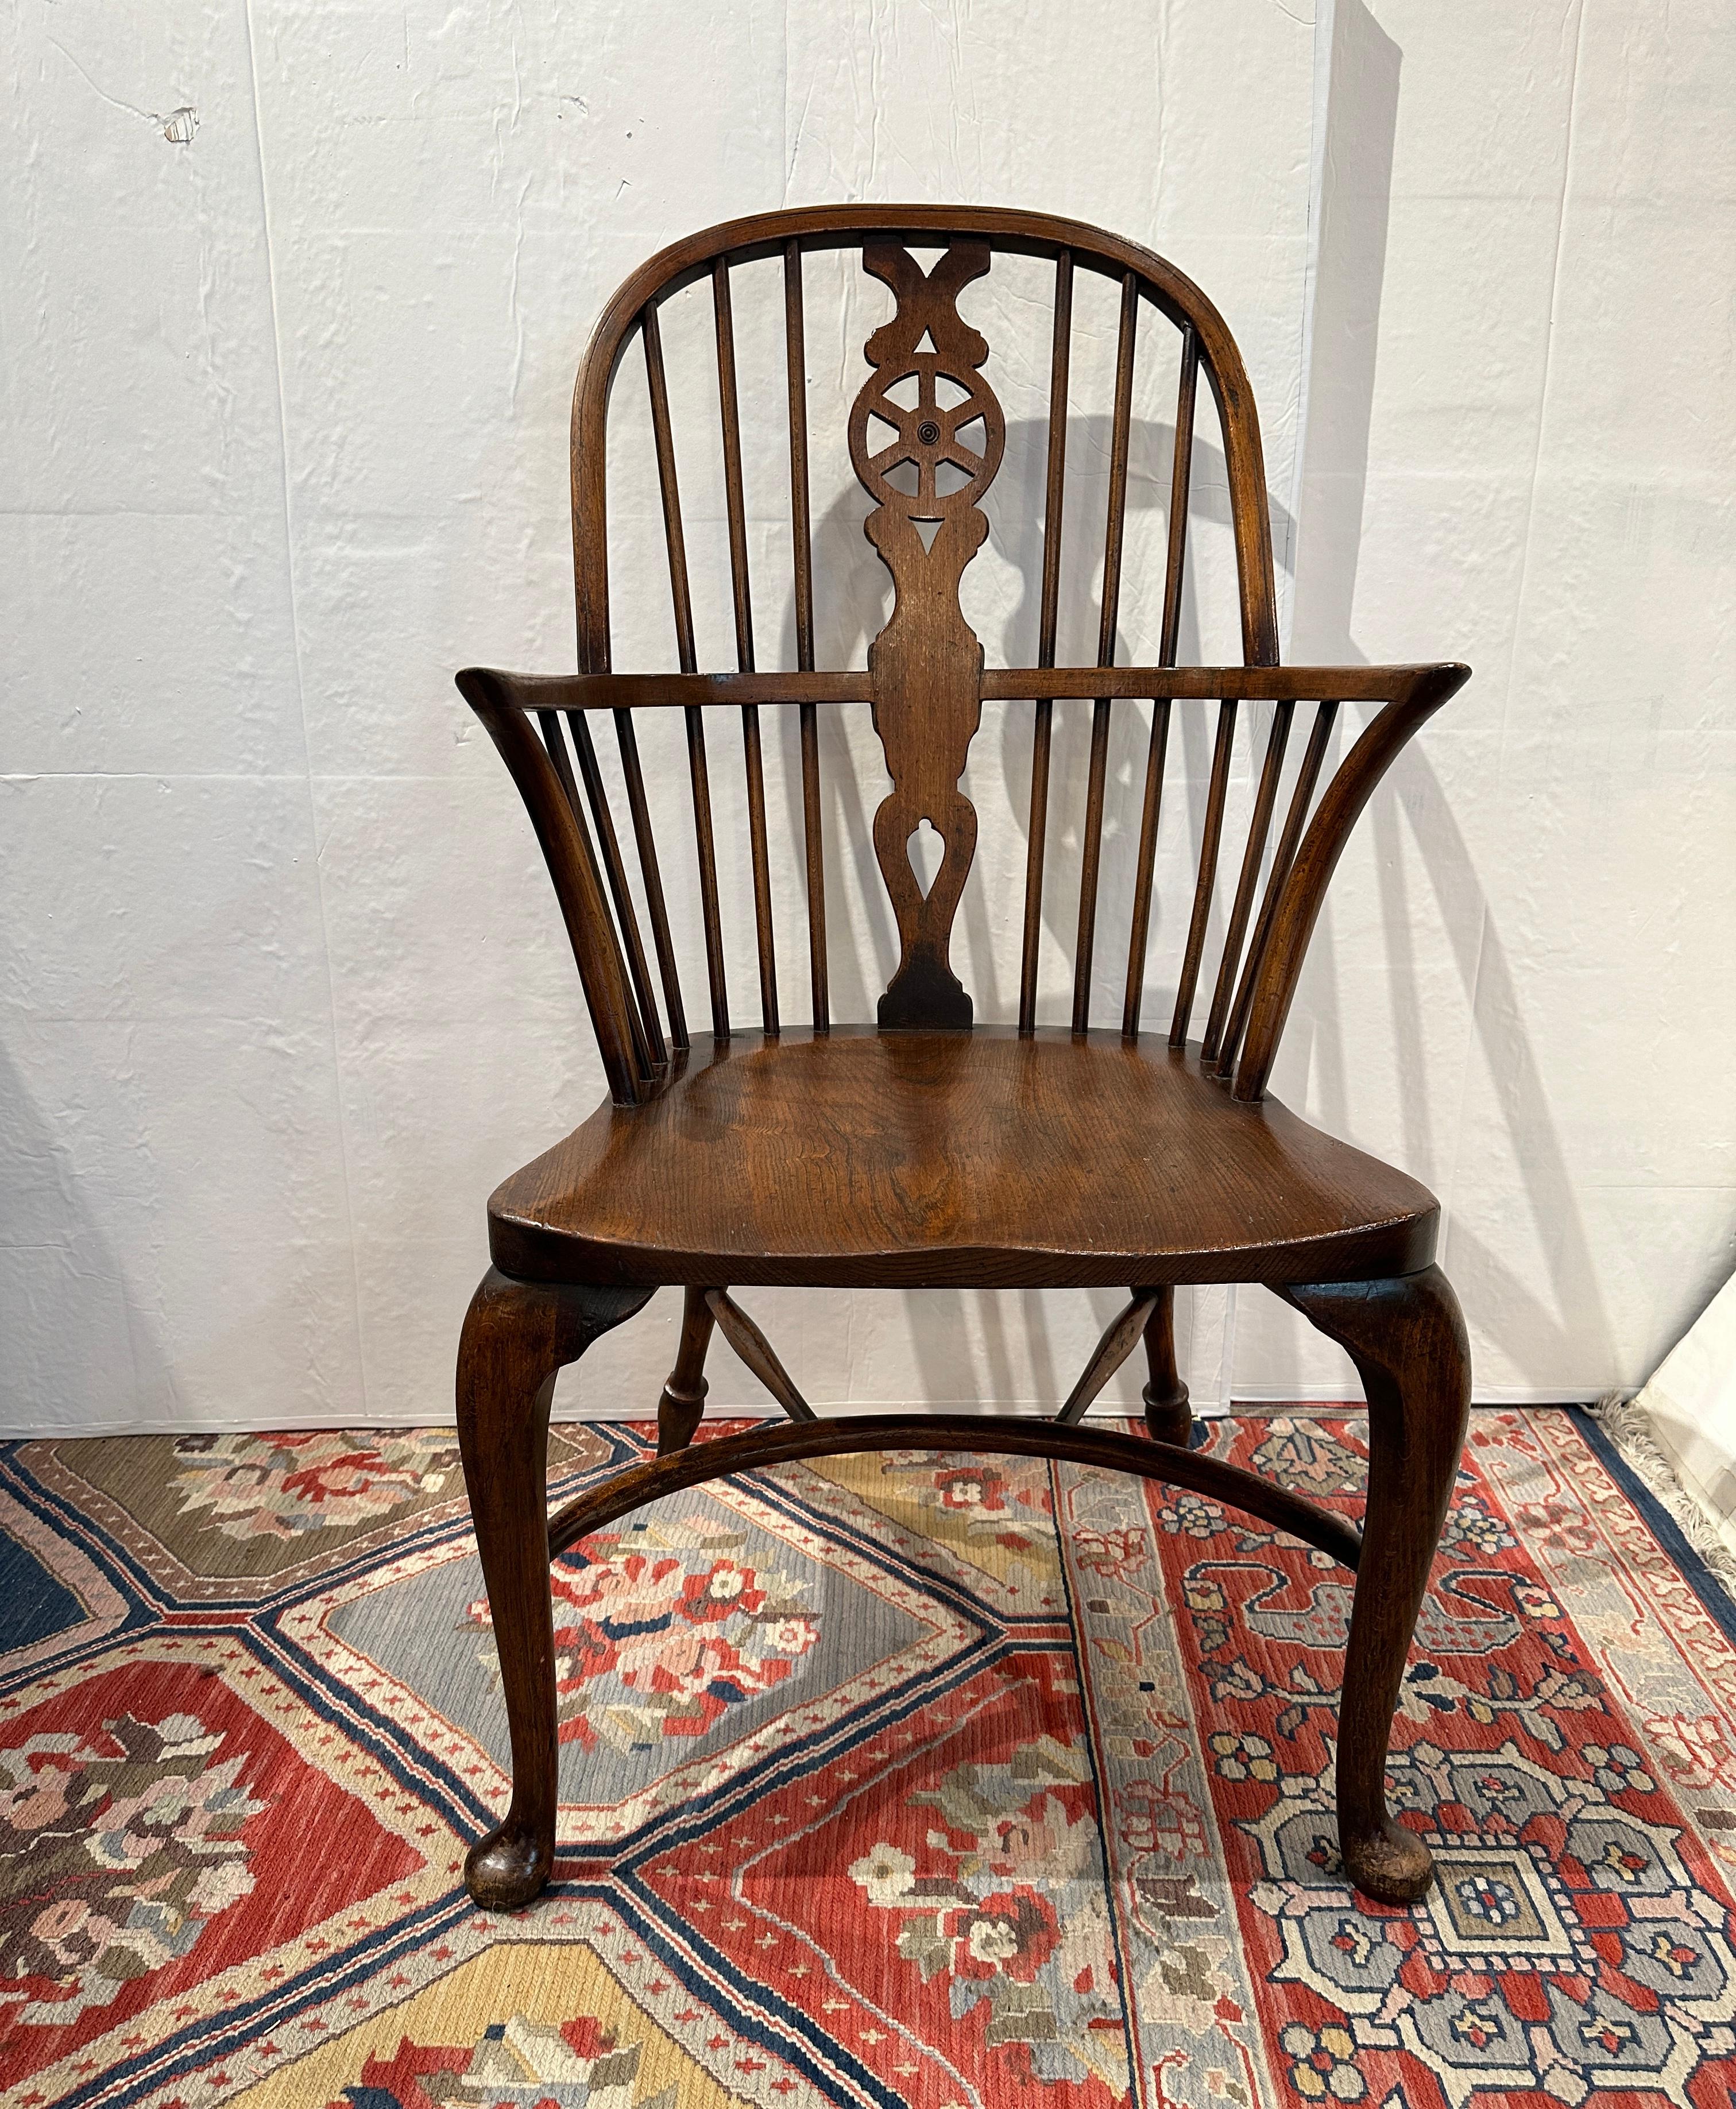 Early 20th Century, Set of 4 Windsor Arm chairs.  Marked underside Wicombe Glenister England.  Wheel back, Elm seat and oak wood.  All In sturdy excellent condition.  Beautiful Windsor chairs.
